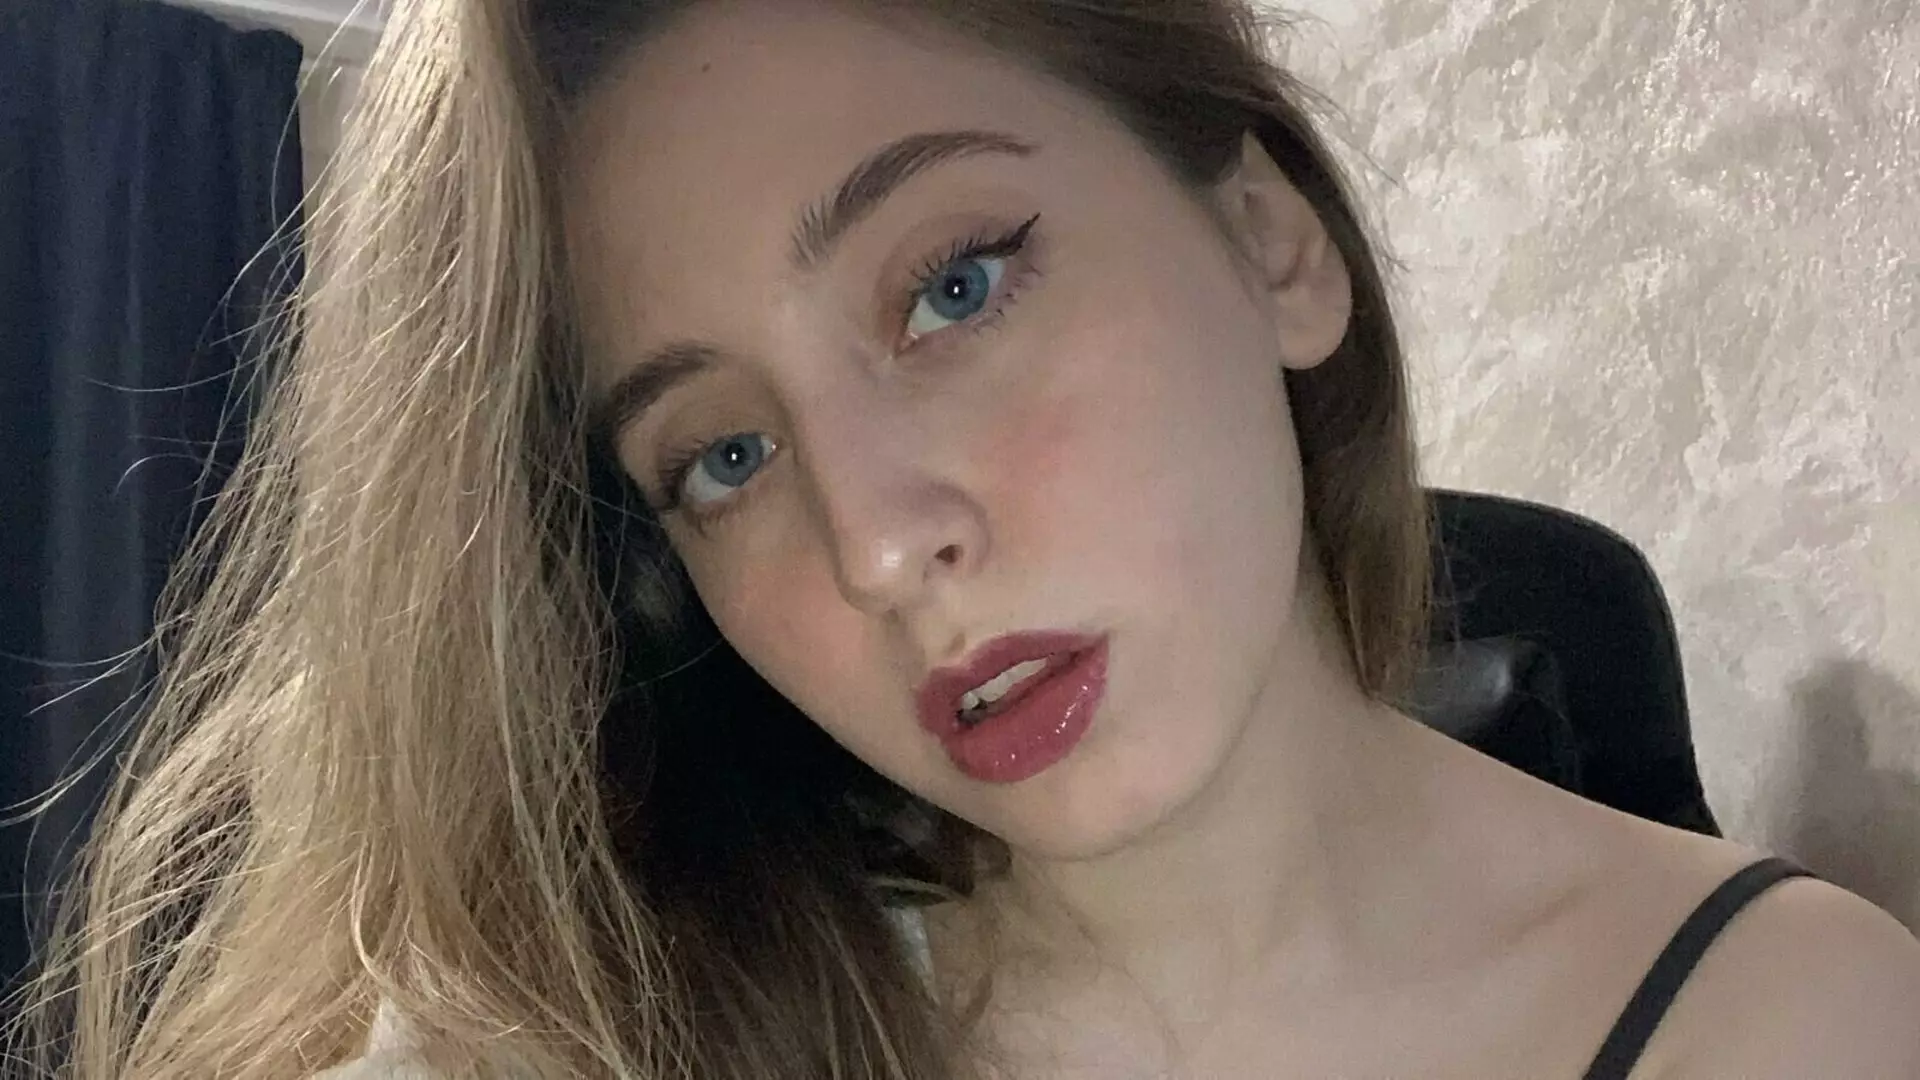 ZinniaEdward's Premium Pictures and Videos 